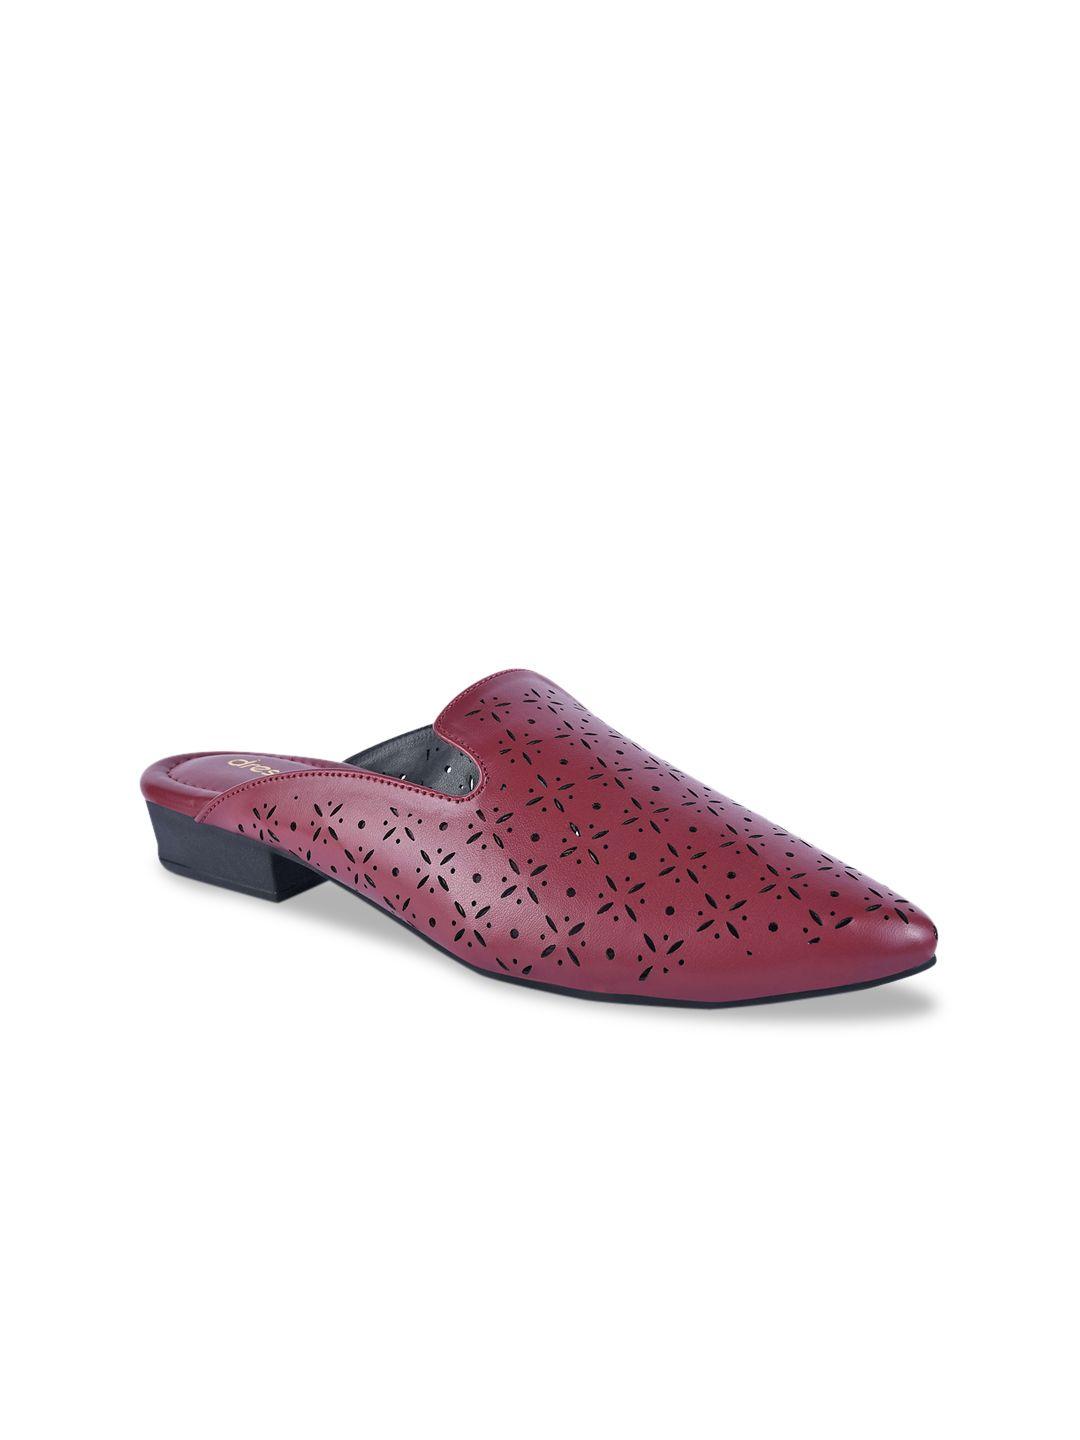 dressberry-women-maroon-textured-mules-with-laser-cuts-flats